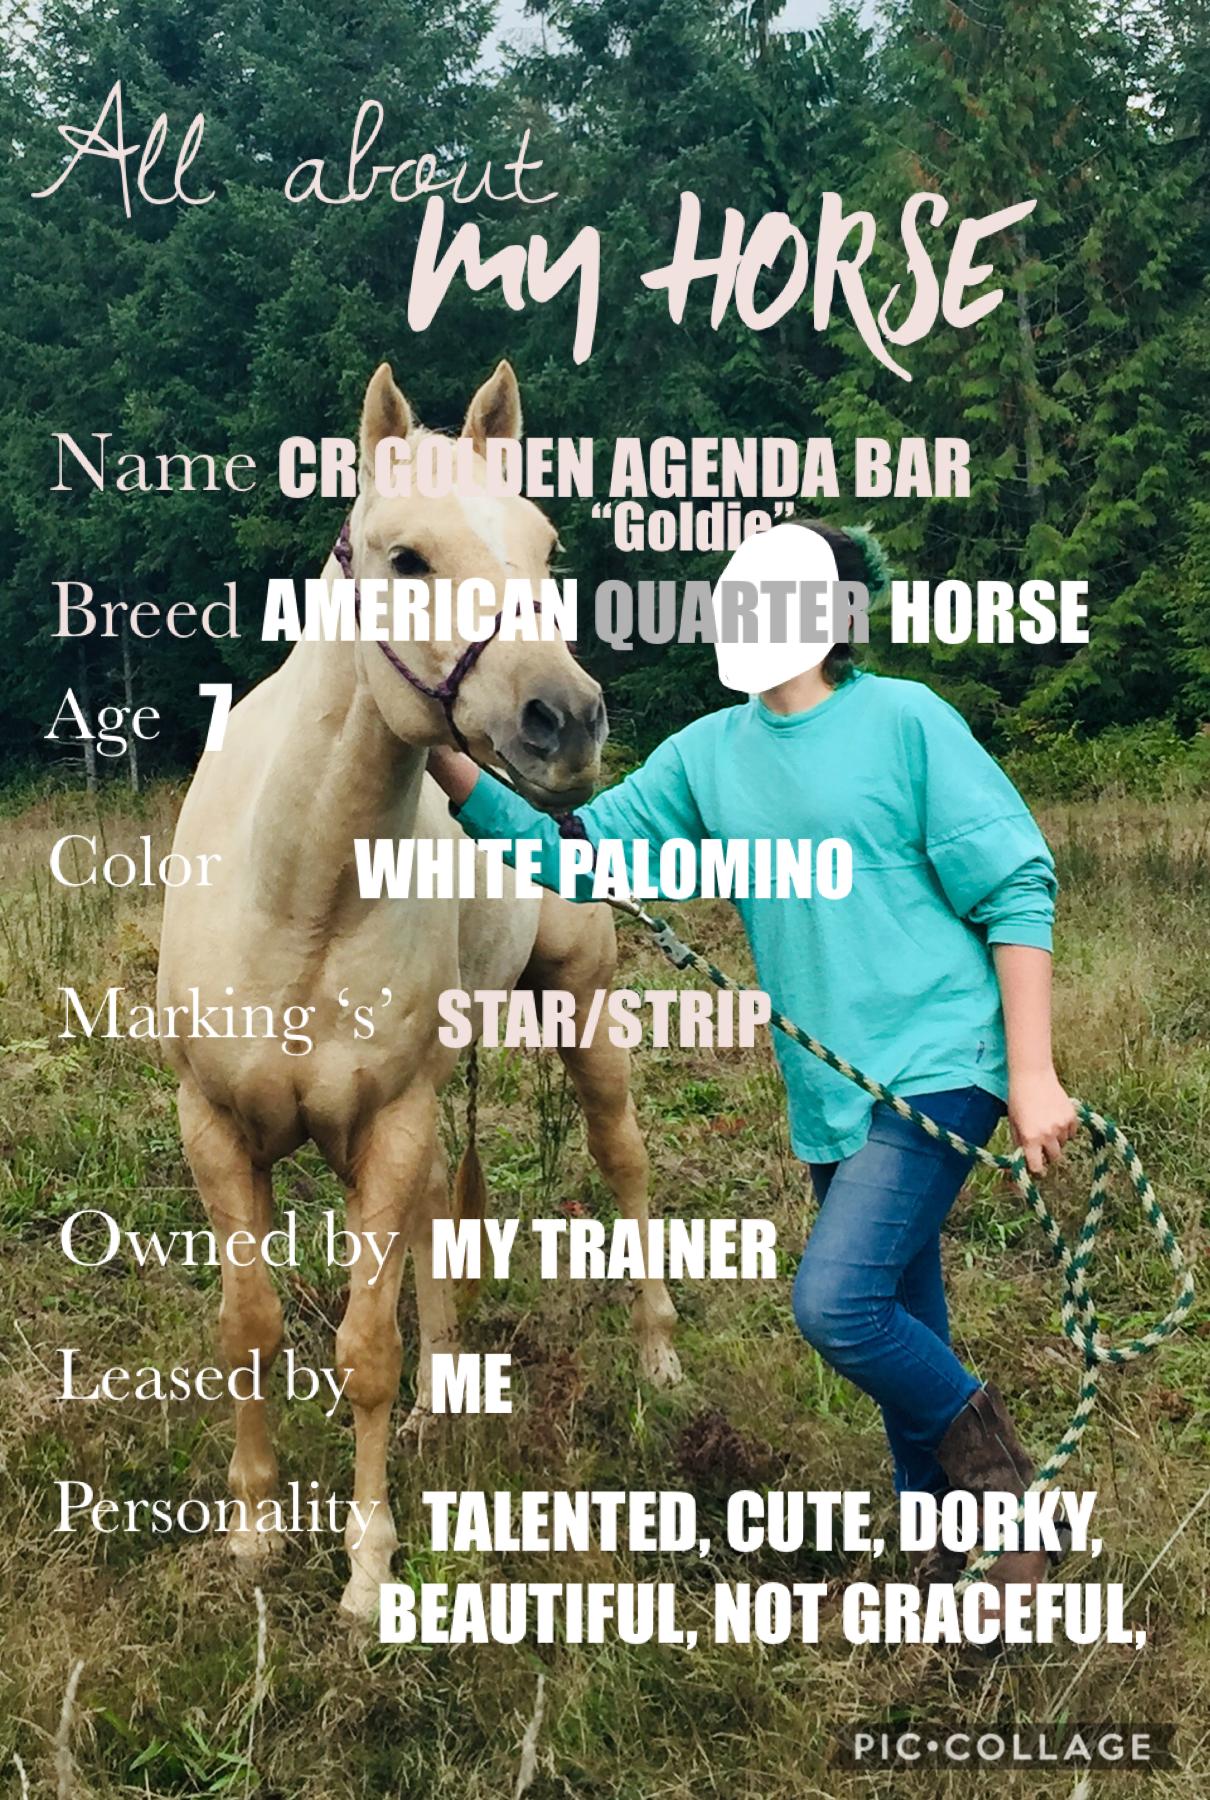 Might as well tell you about my horse, especially since this is a horse collage place thingy 😂.



Face blocked for privacy reasons.